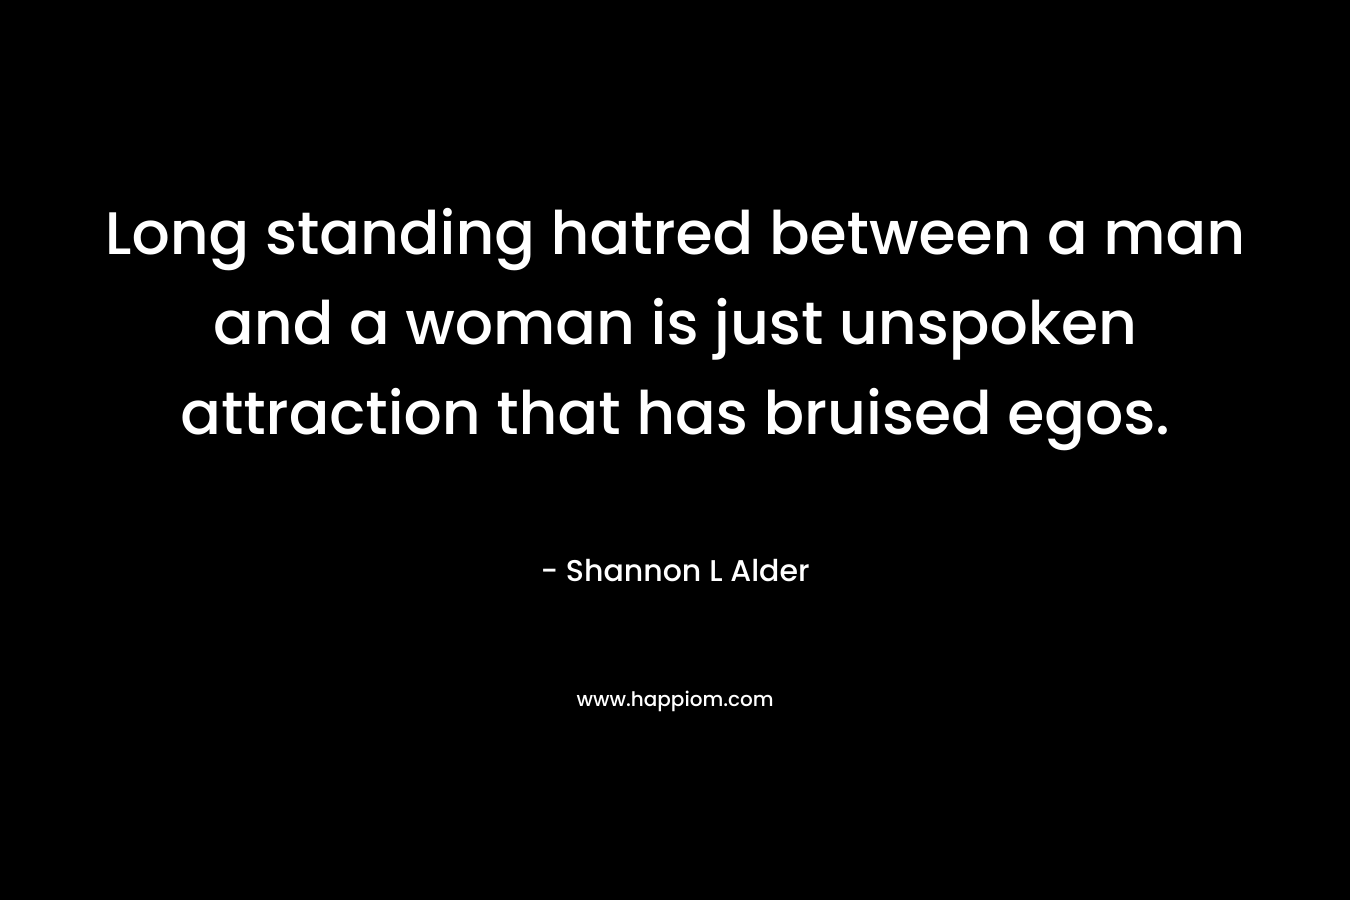 Long standing hatred between a man and a woman is just unspoken attraction that has bruised egos.